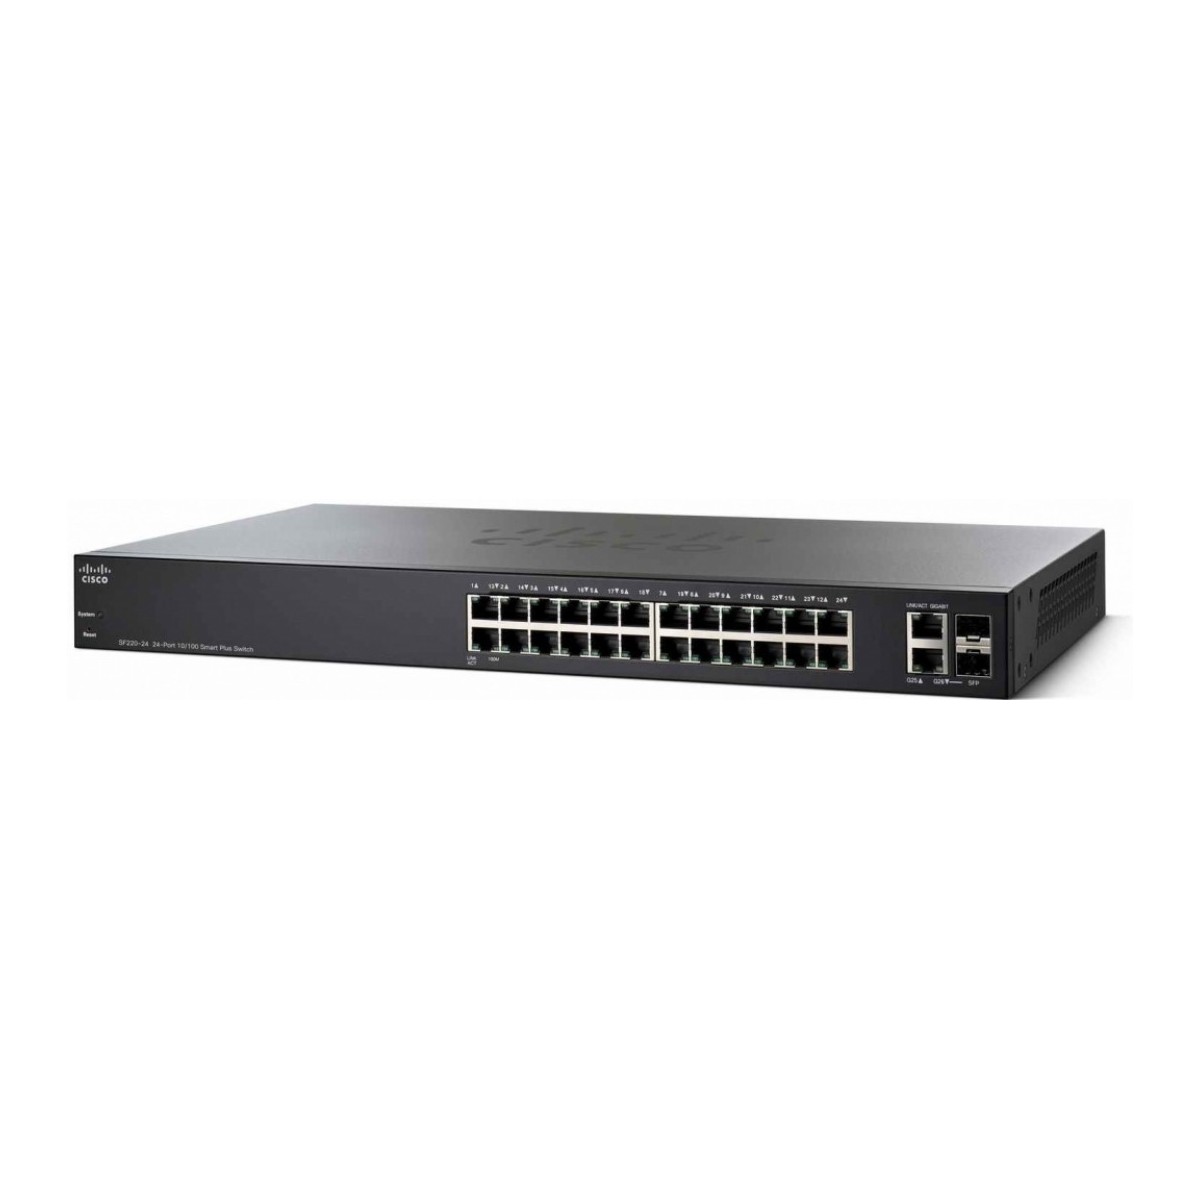 Cisco Small Business SF220-24 - Managed - L2 - Fast Ethernet (10/100)